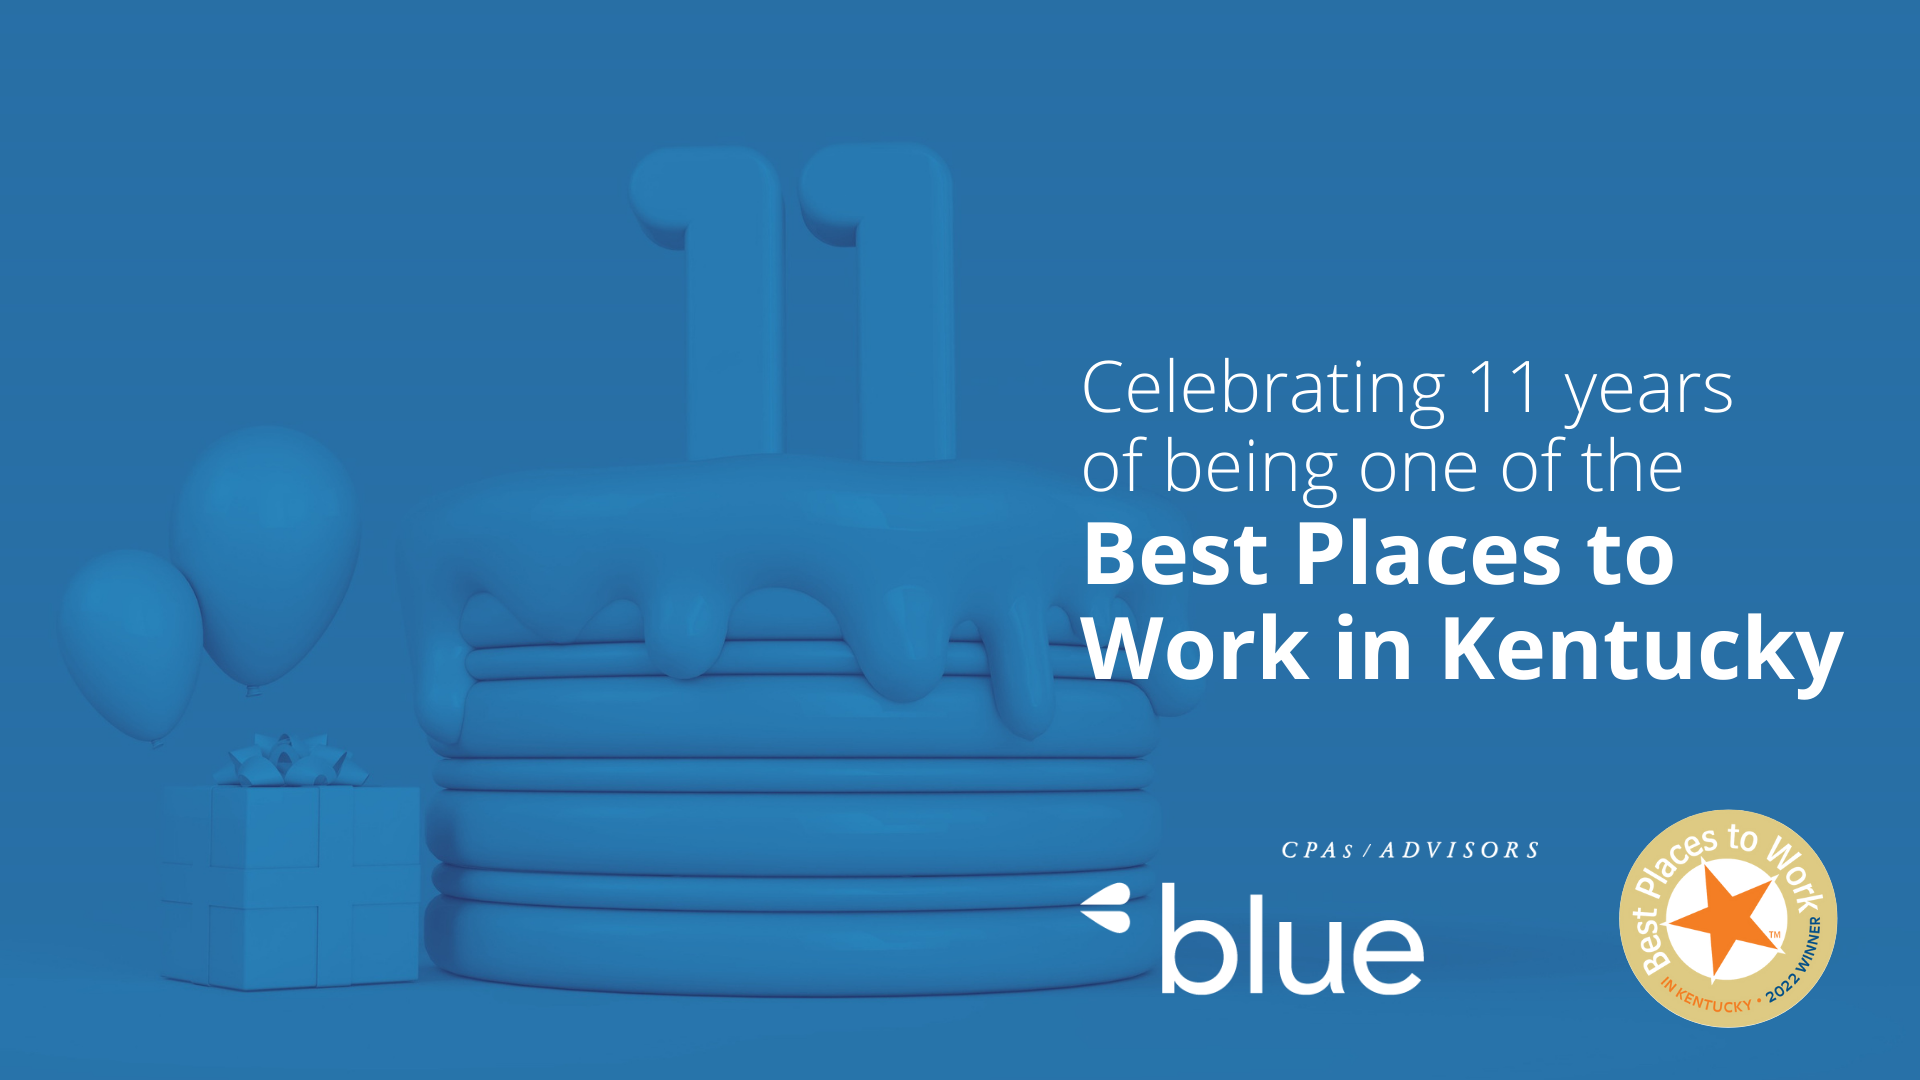 Blue & Co., LLC Named One of Kentucky’s Best Places to Work for 11th Year | Best Places to Work | Celebrating 11 Years as a Best Place to Work